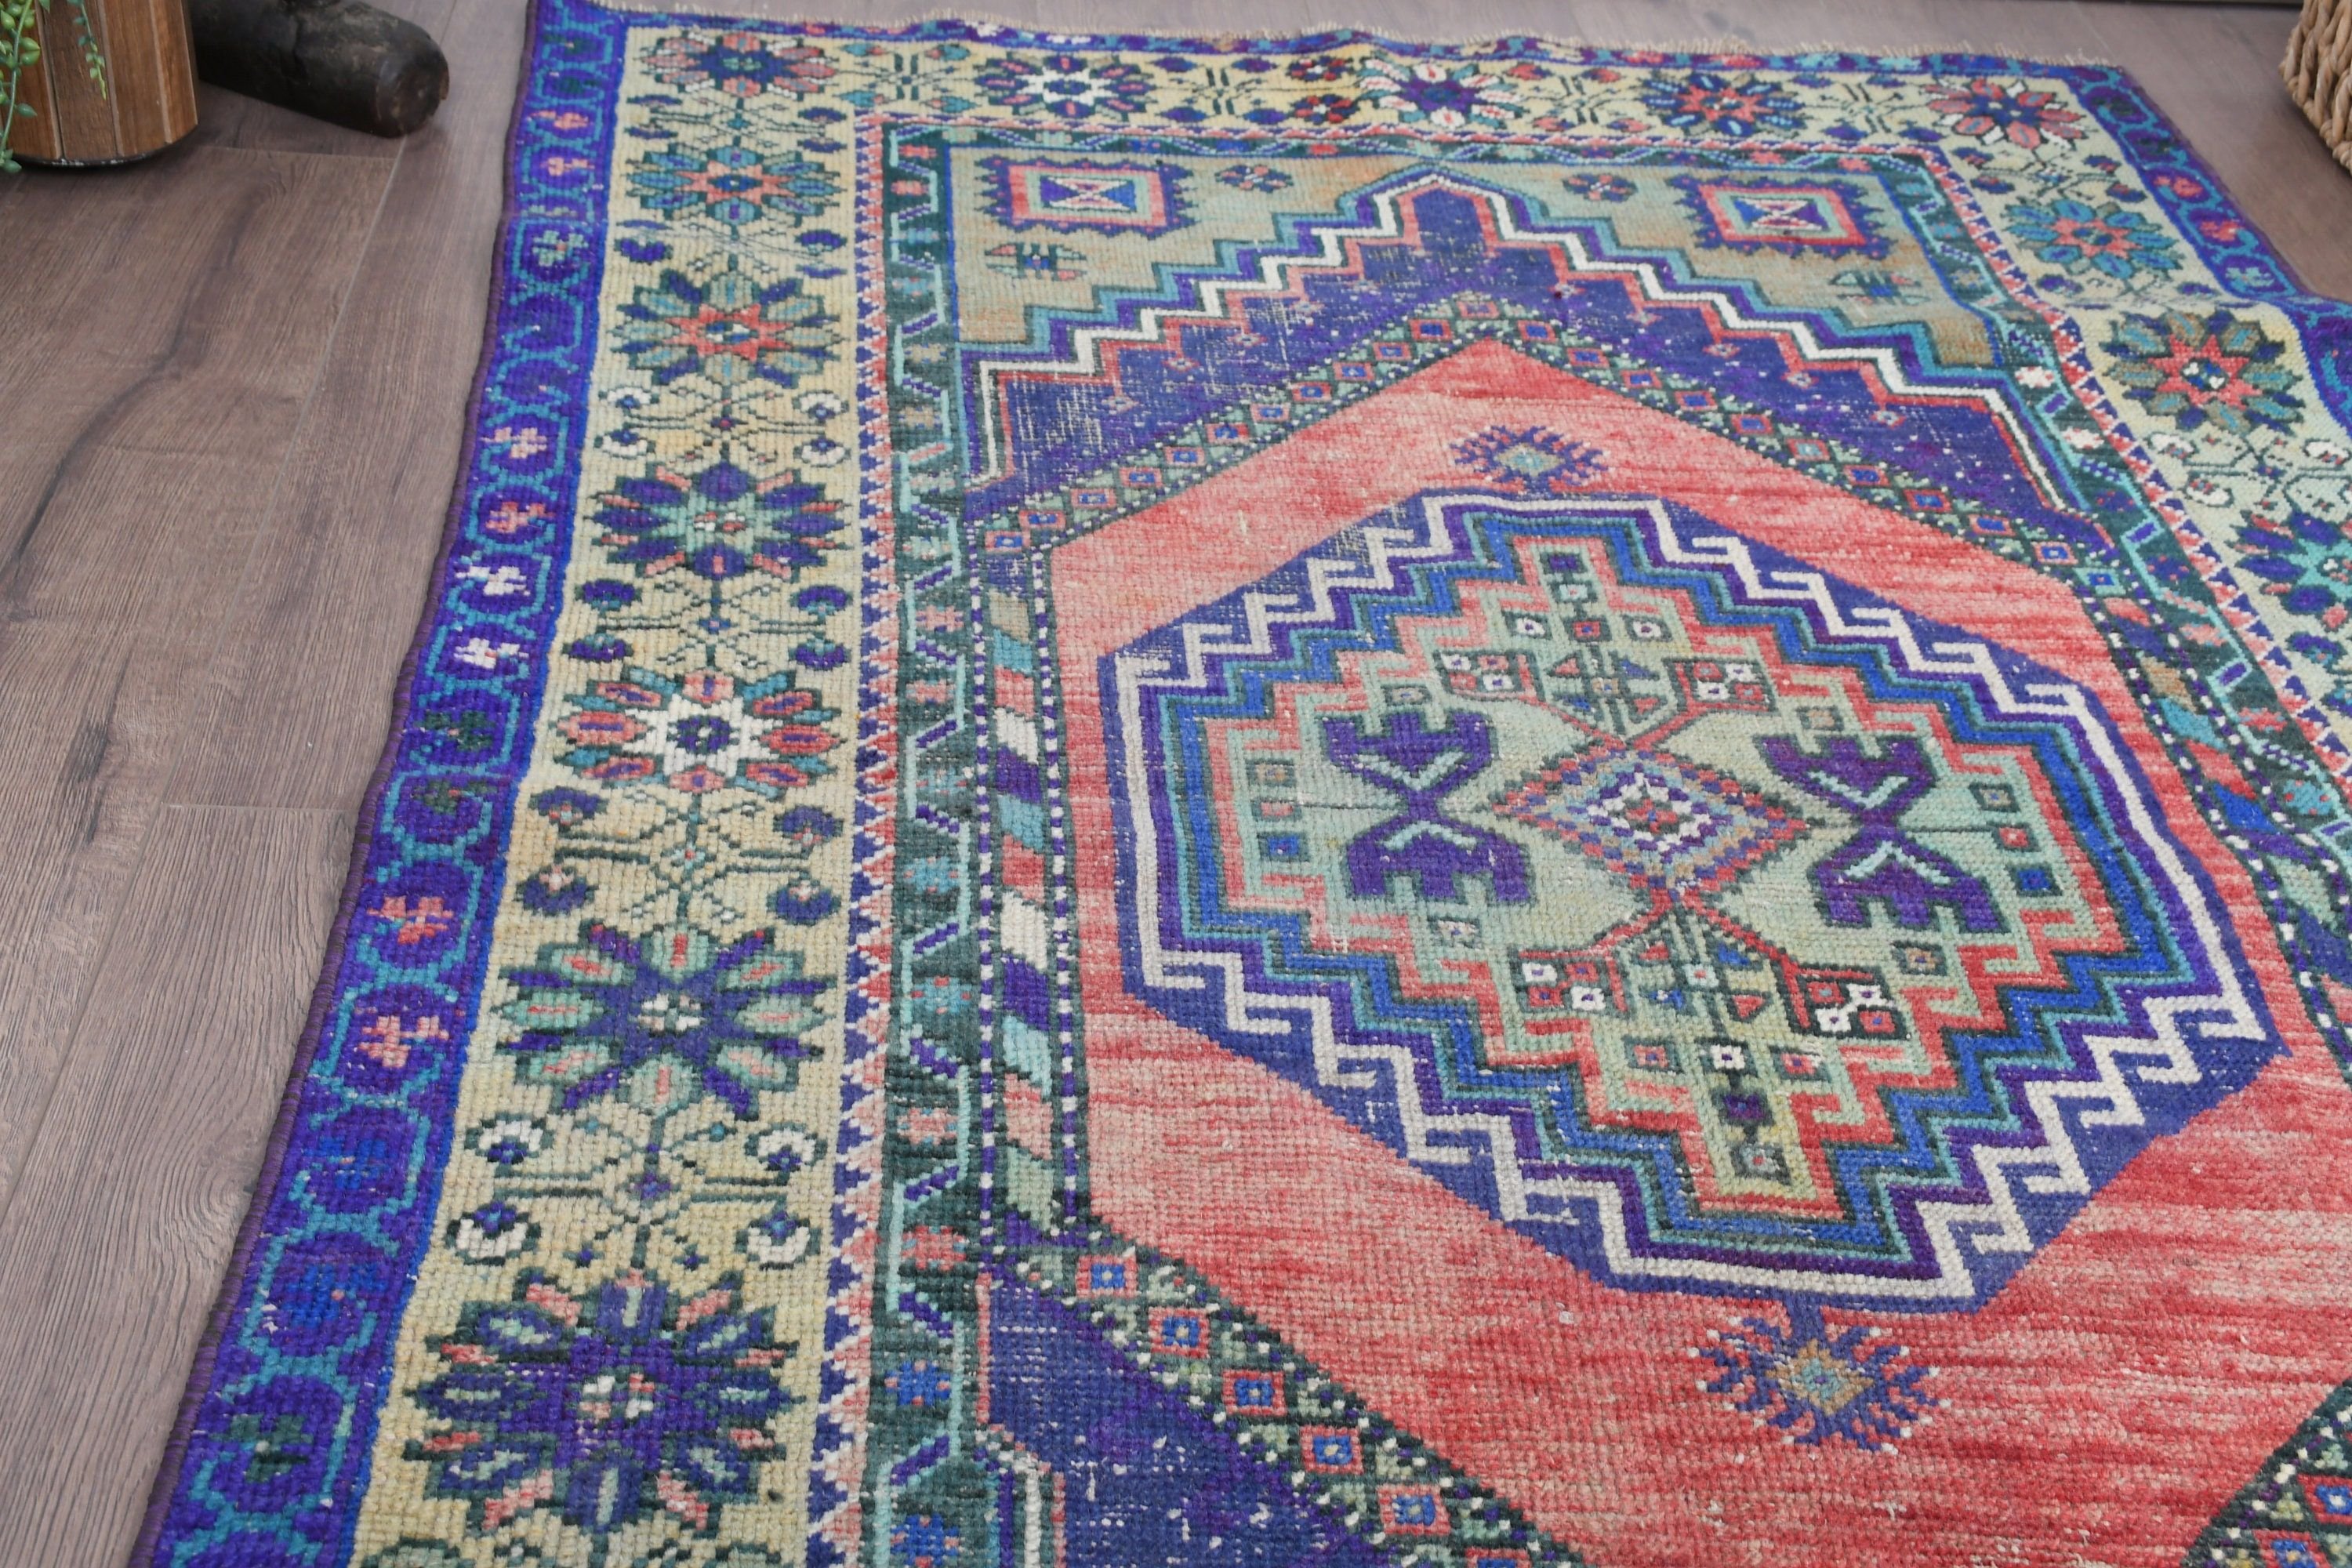 Rugs for Entry, Kitchen Rug, Vintage Rugs, Blue Antique Rugs, Entry Rug, Turkish Rug, 3.4x5.8 ft Accent Rugs, Cool Rug, Home Decor Rugs